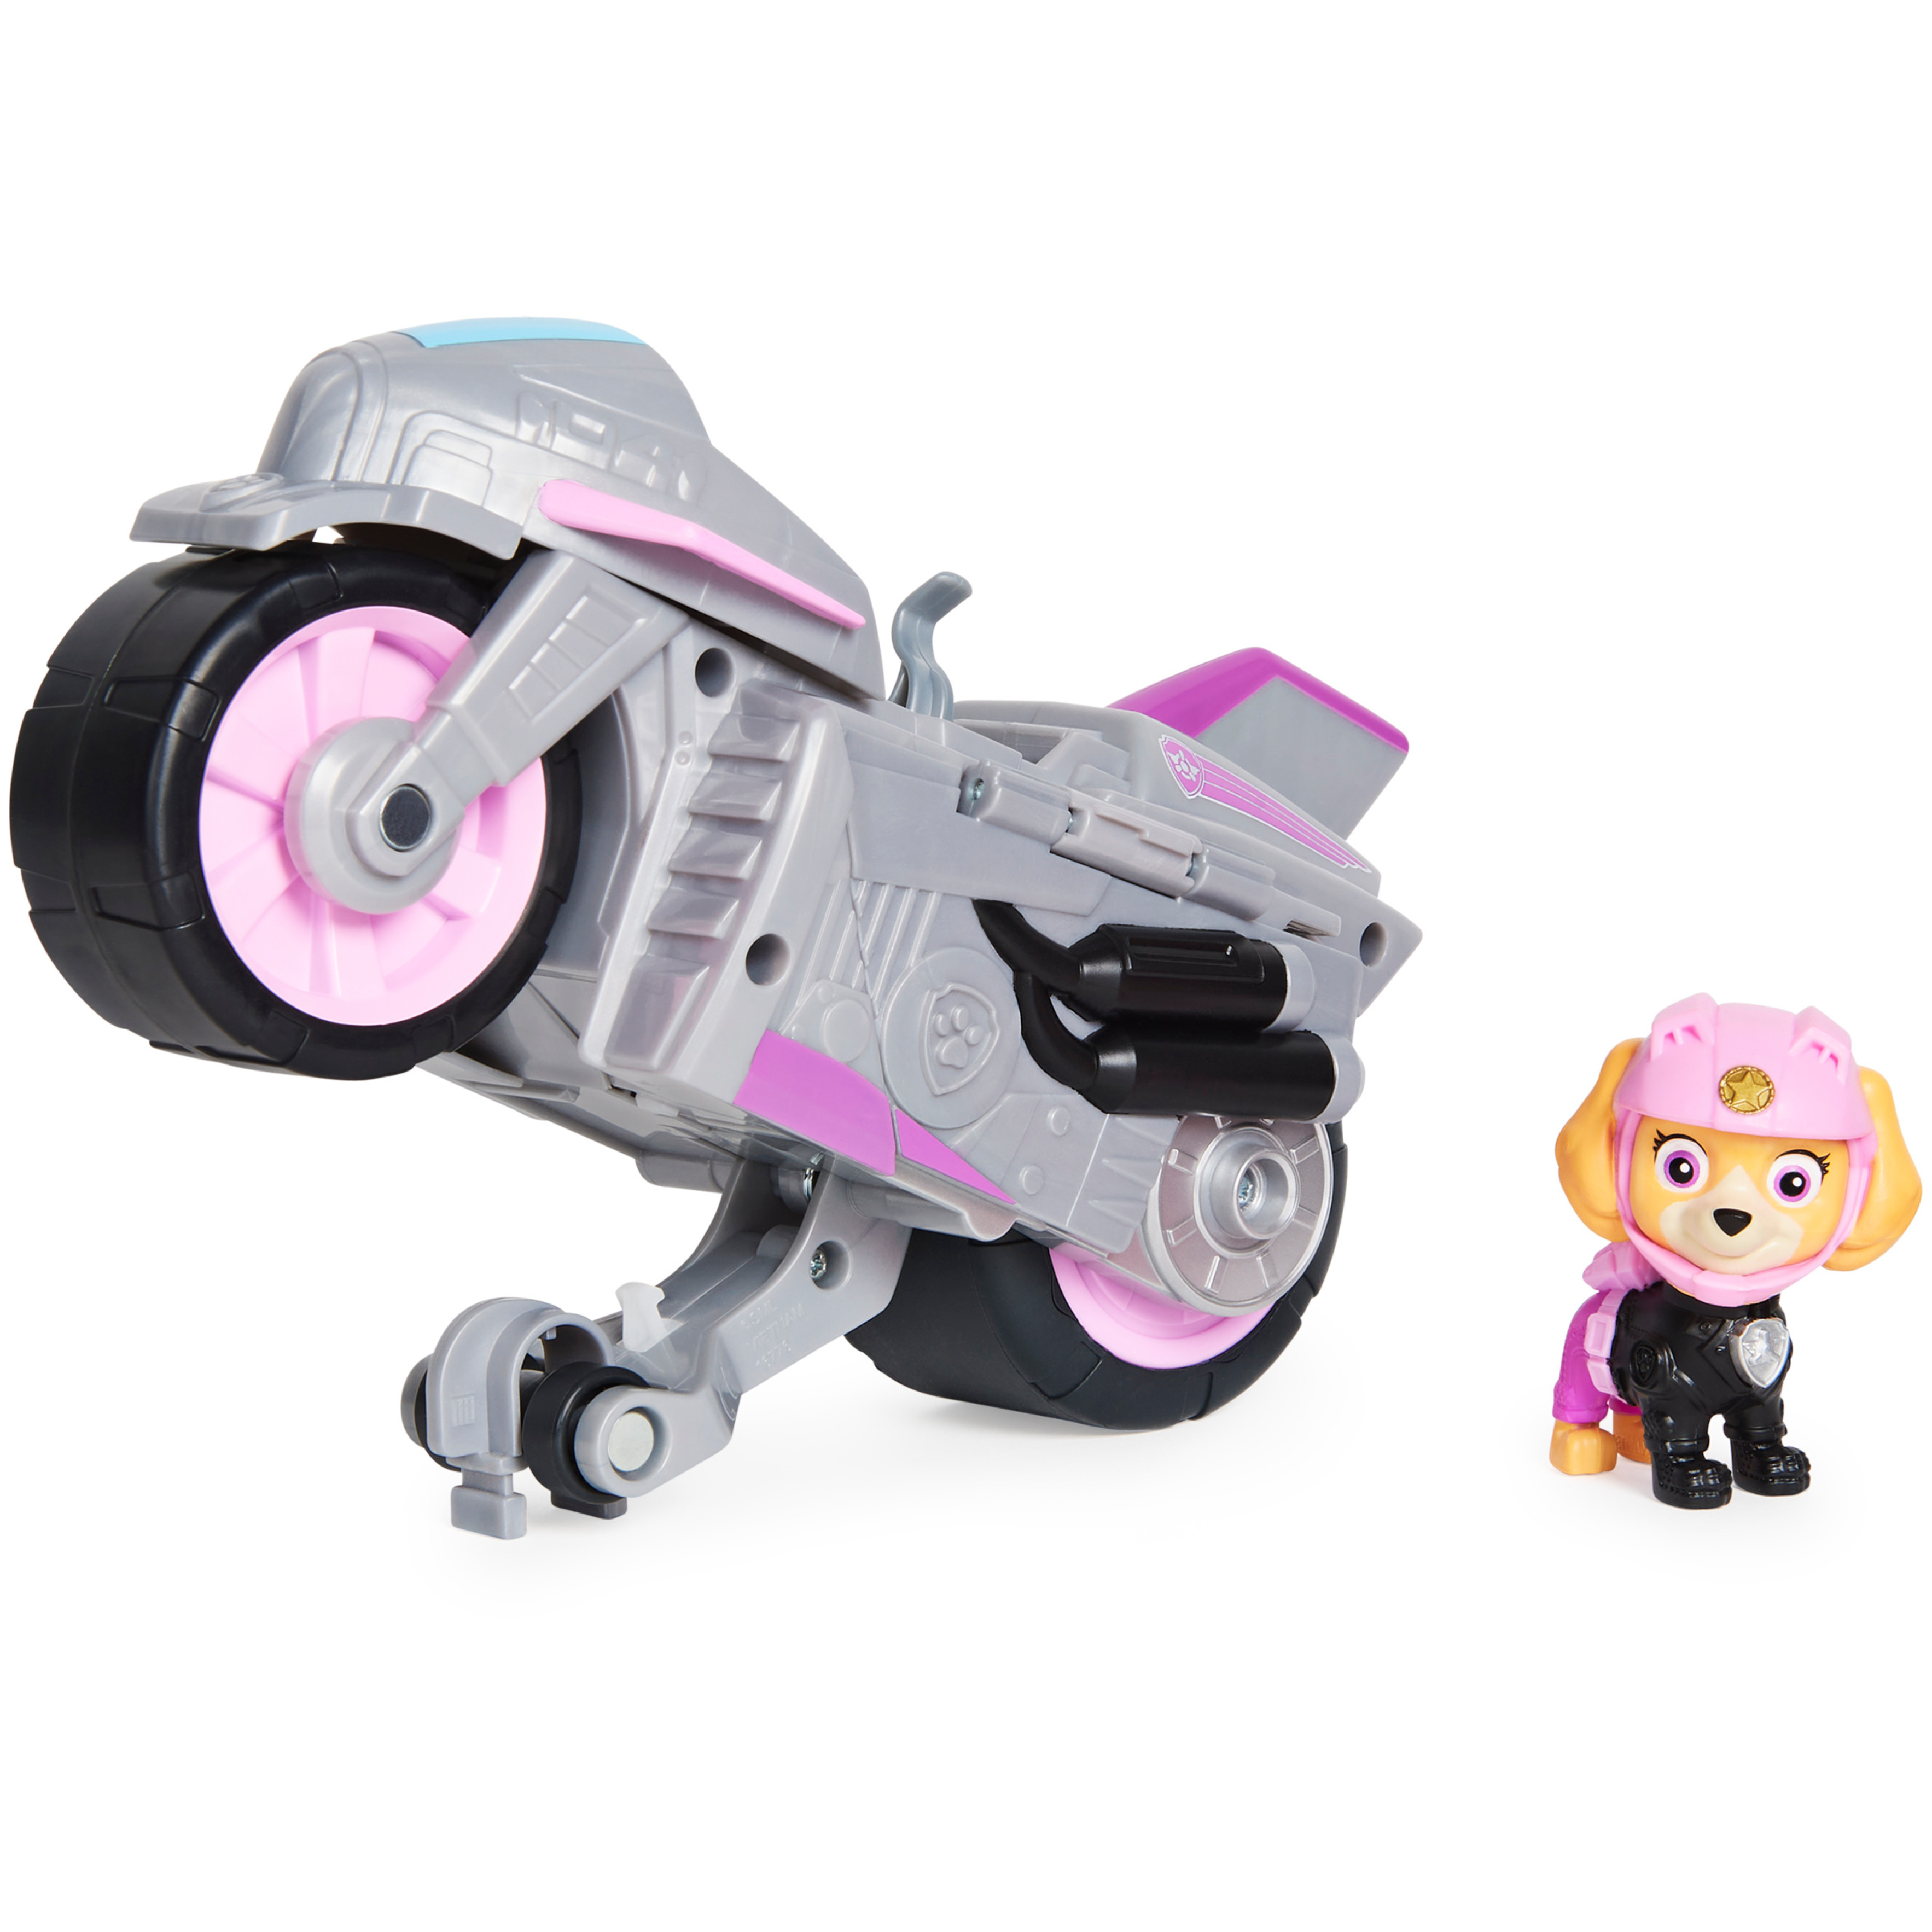 PAW Patrol, Moto Pups Skye’s Deluxe Pull Back Motorcycle Vehicle with Wheelie Feature and Figure - image 1 of 7